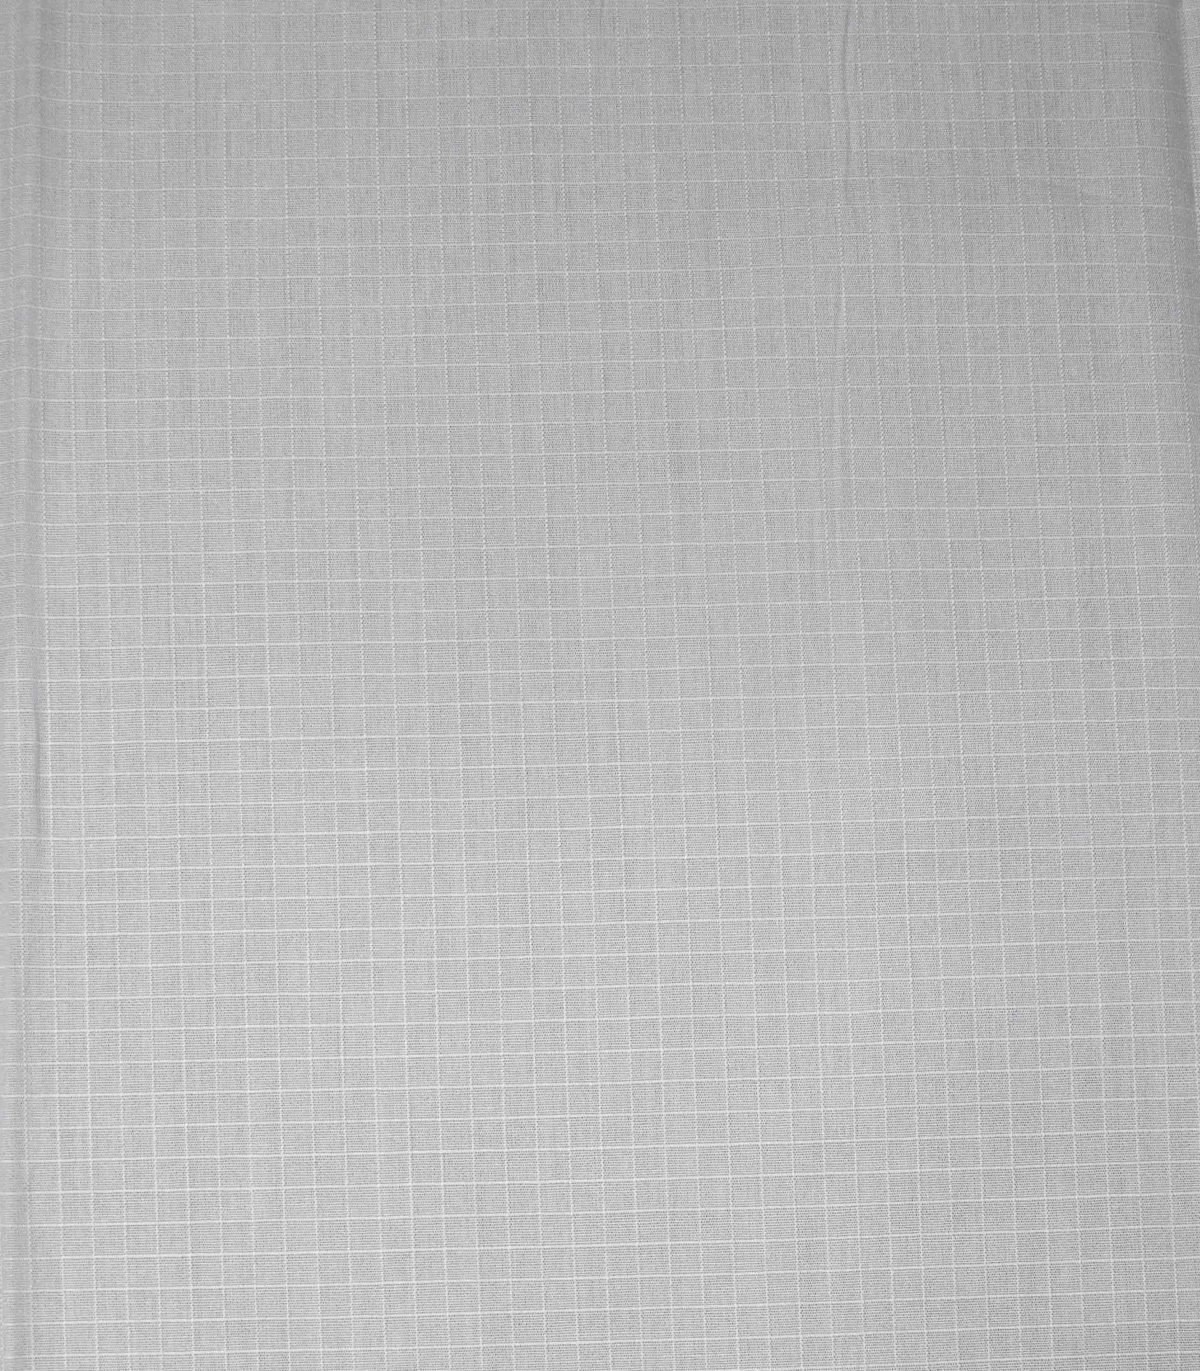 Cotton Ribstop RFD Woven Fabric